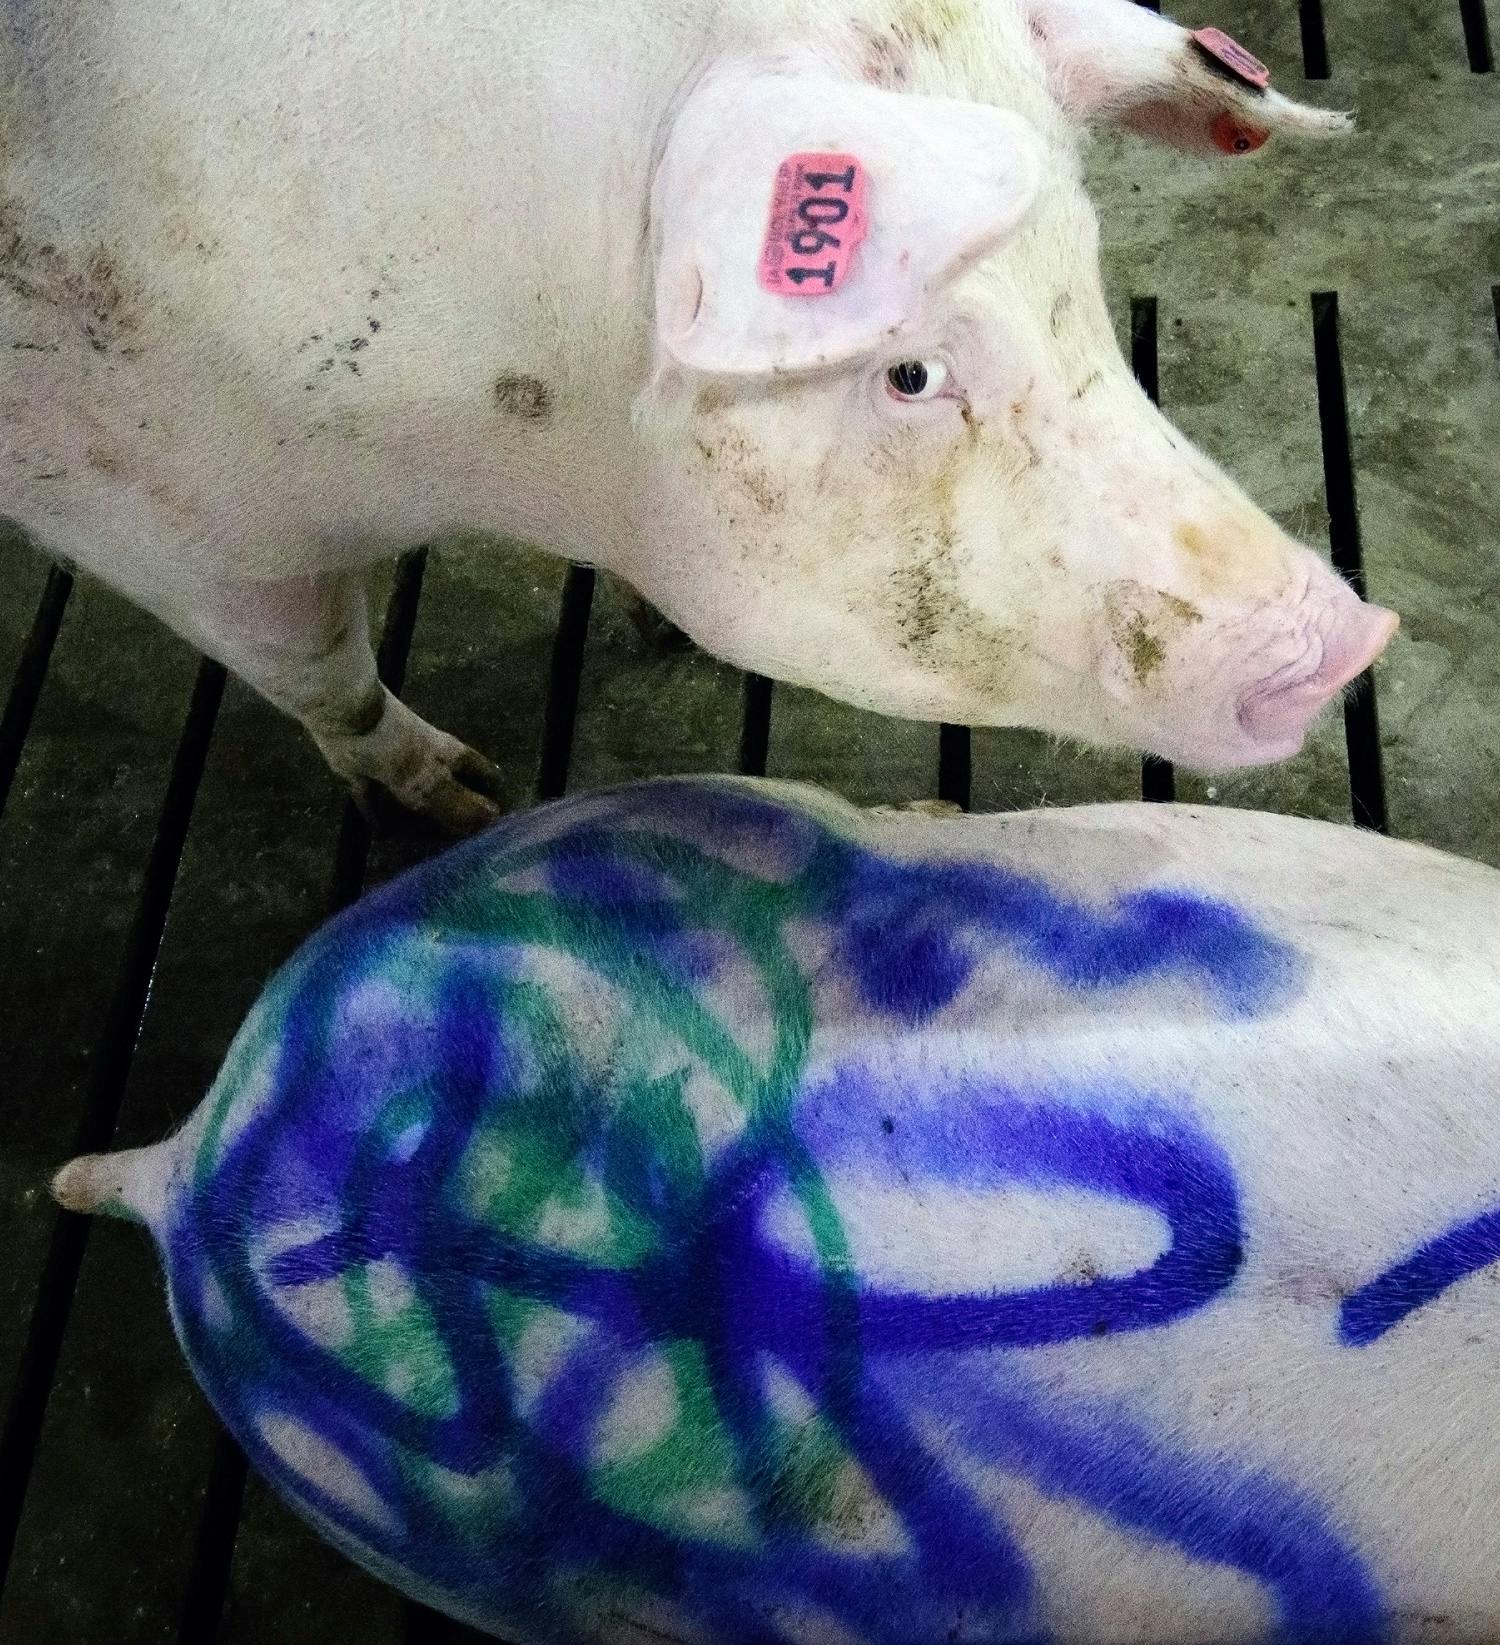 Every sow has an electronic ear tag that monitors her eating habits and whereabouts. Sows that need special attention at feeding stations get colorful markings to tell them apart.